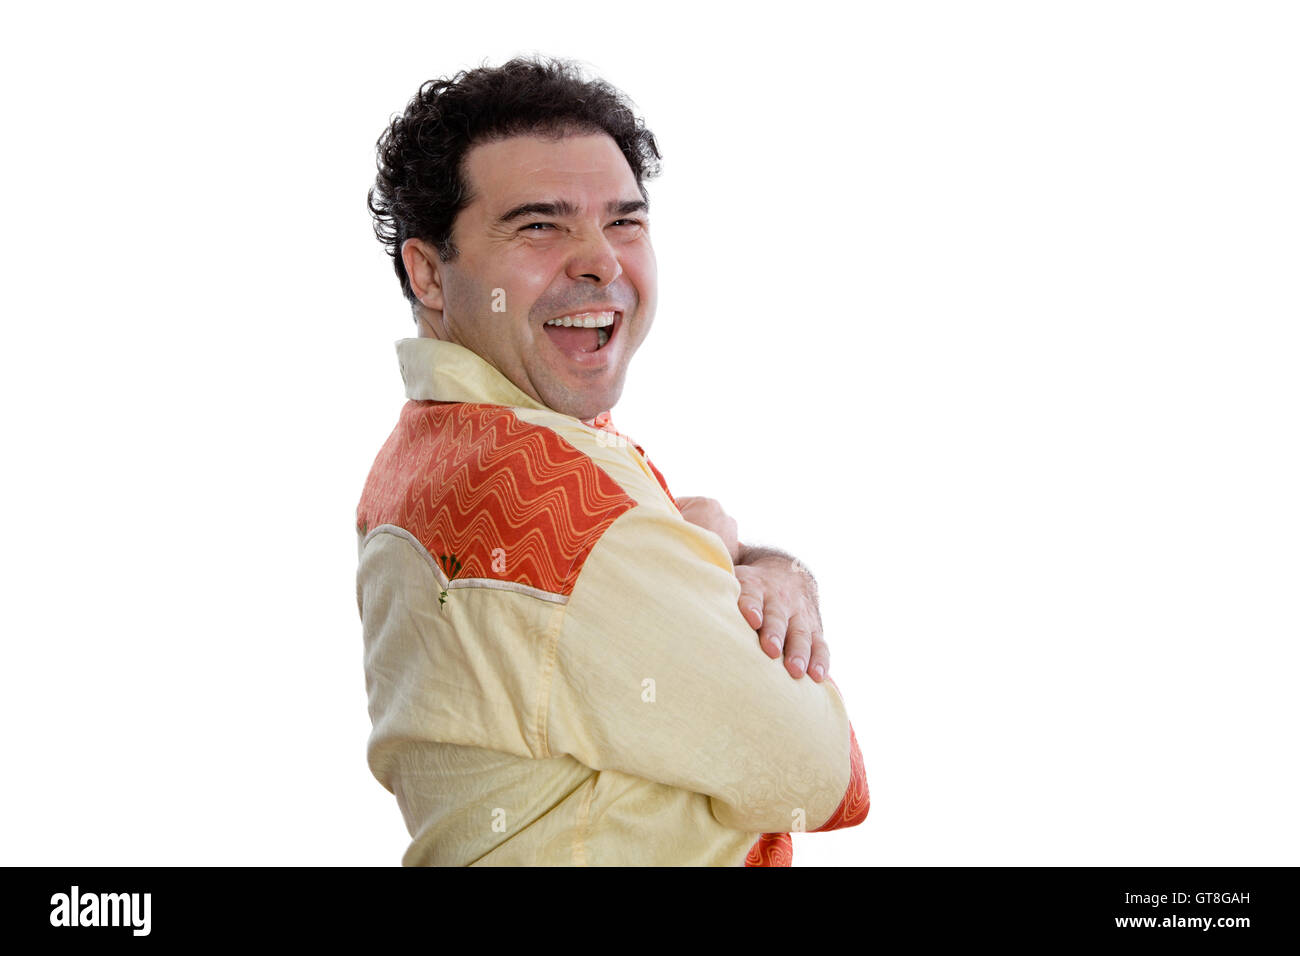 Half Body Shot of a Cheerful Middle Aged Man Wearing Trendy African Shirt Looking at the Camera Against White Background. Stock Photo